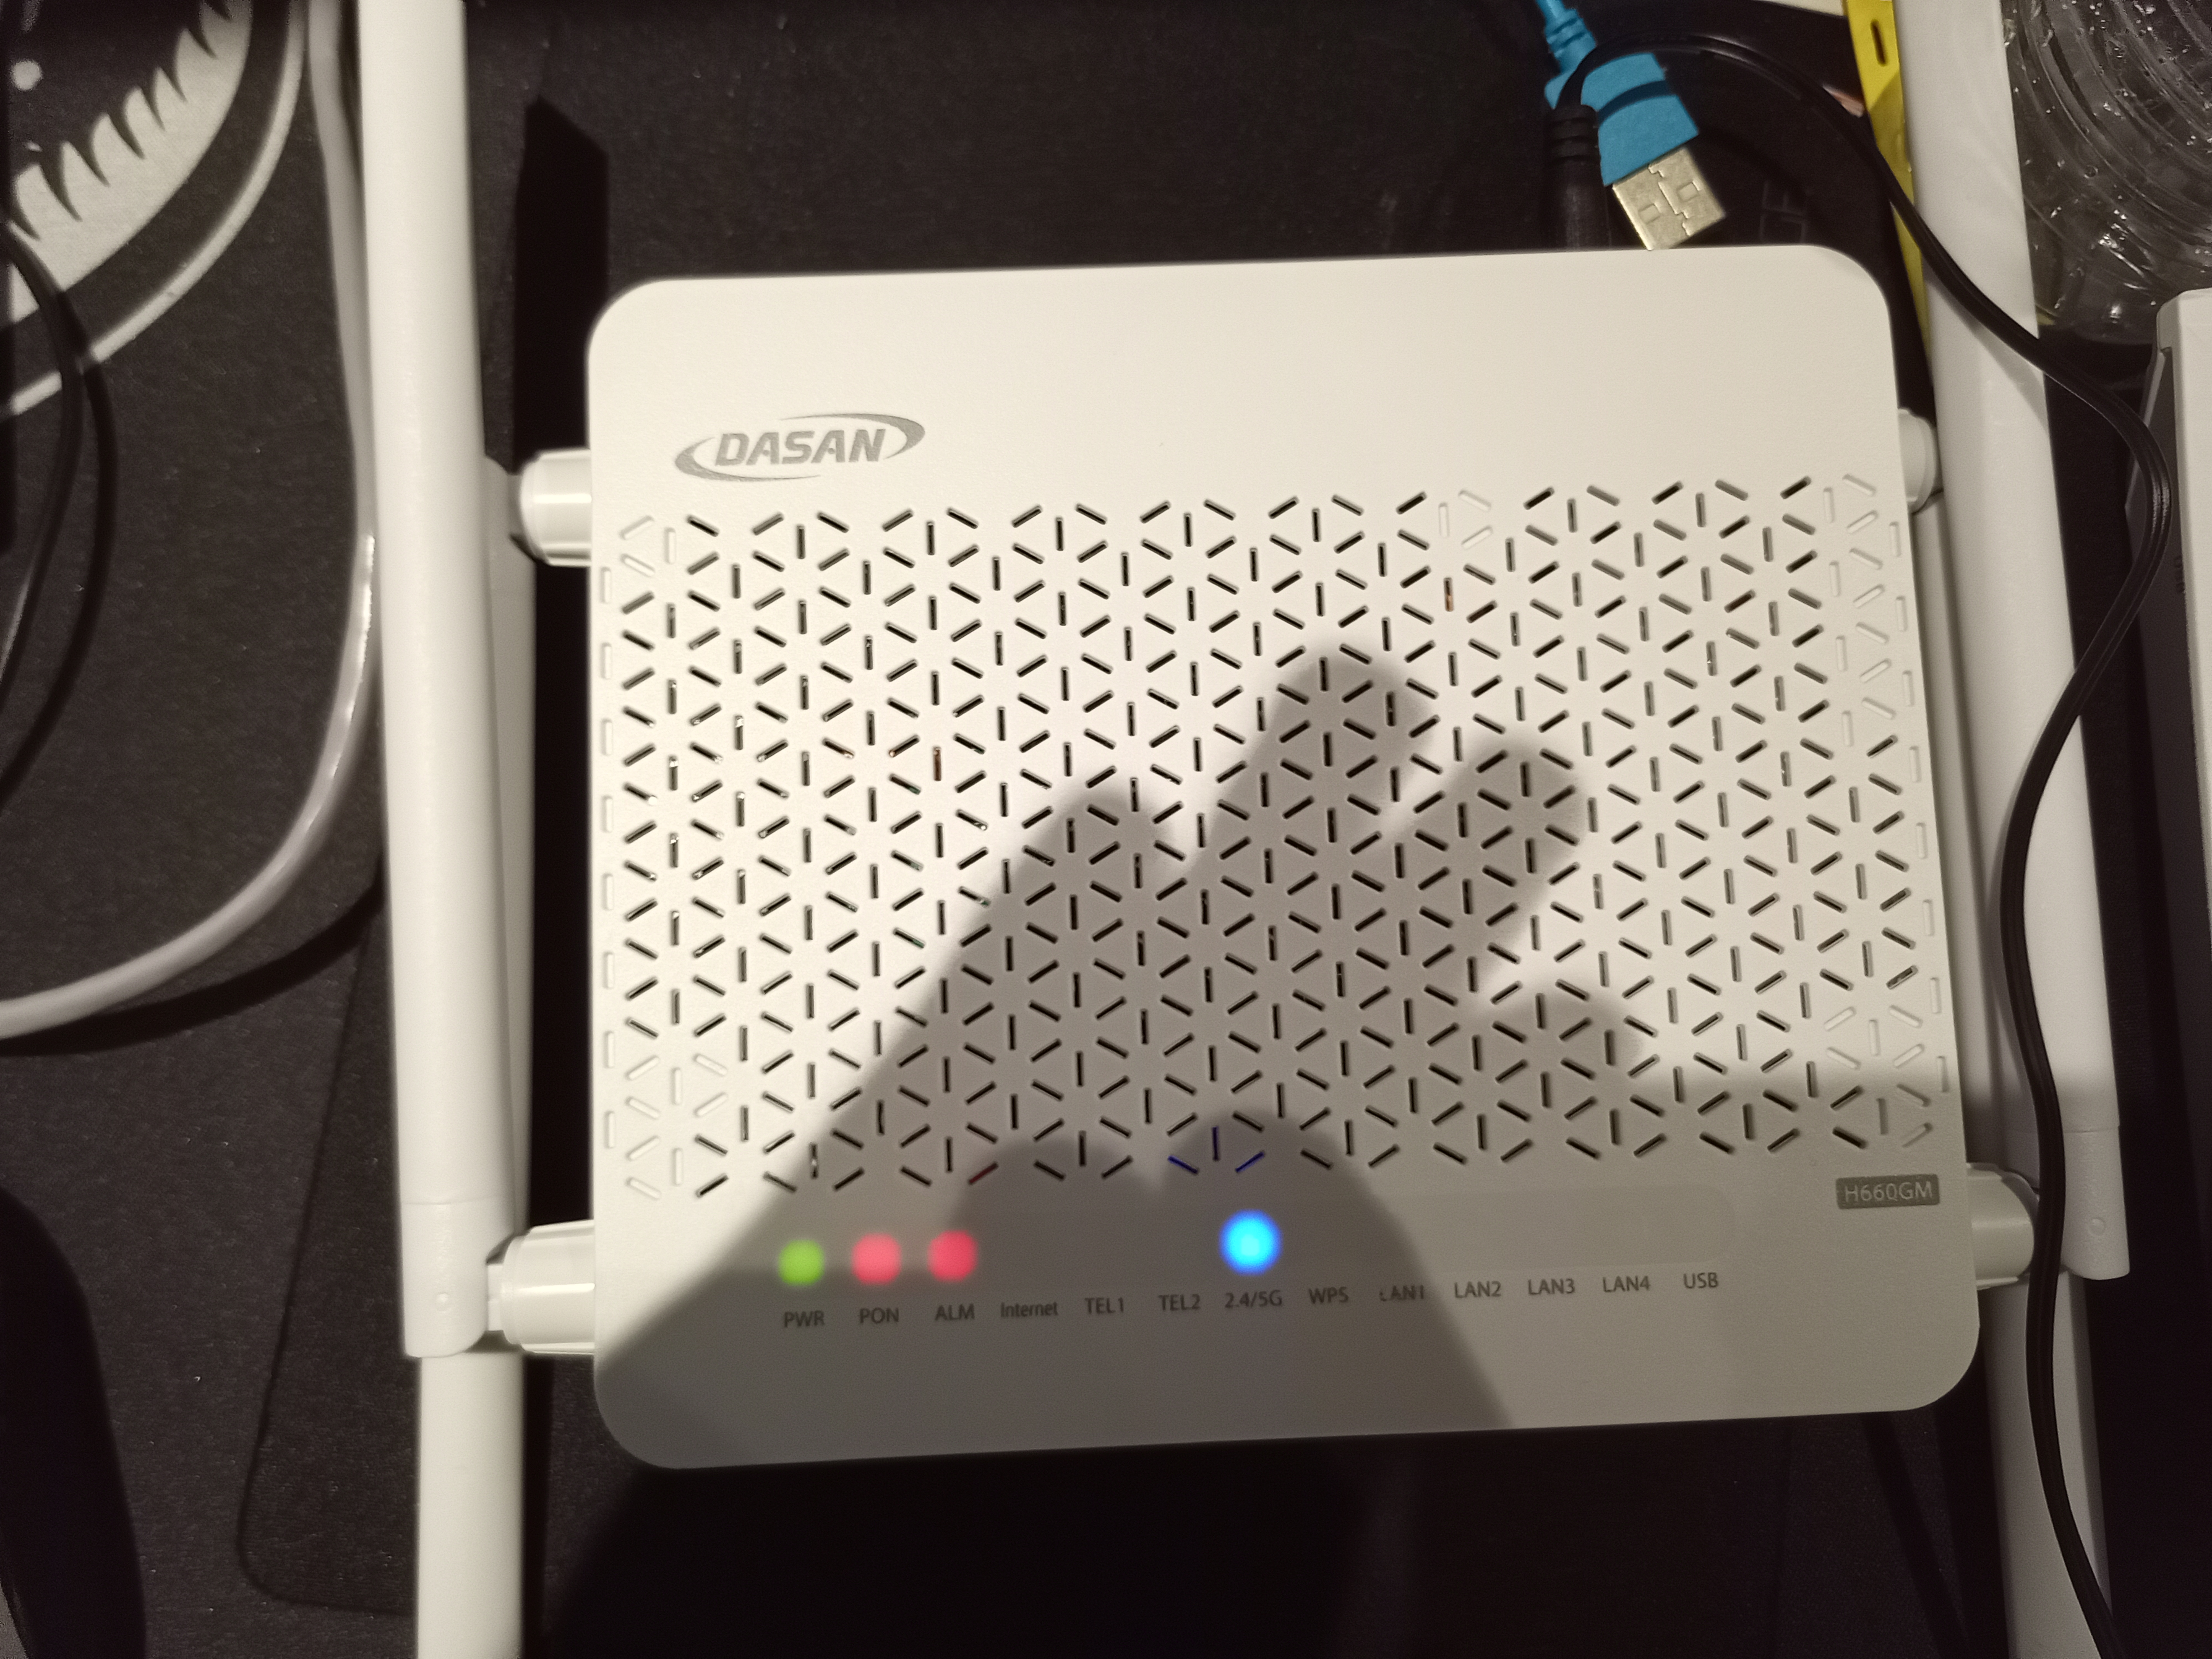 How to change the WiFi password on a DASAN H660GM router